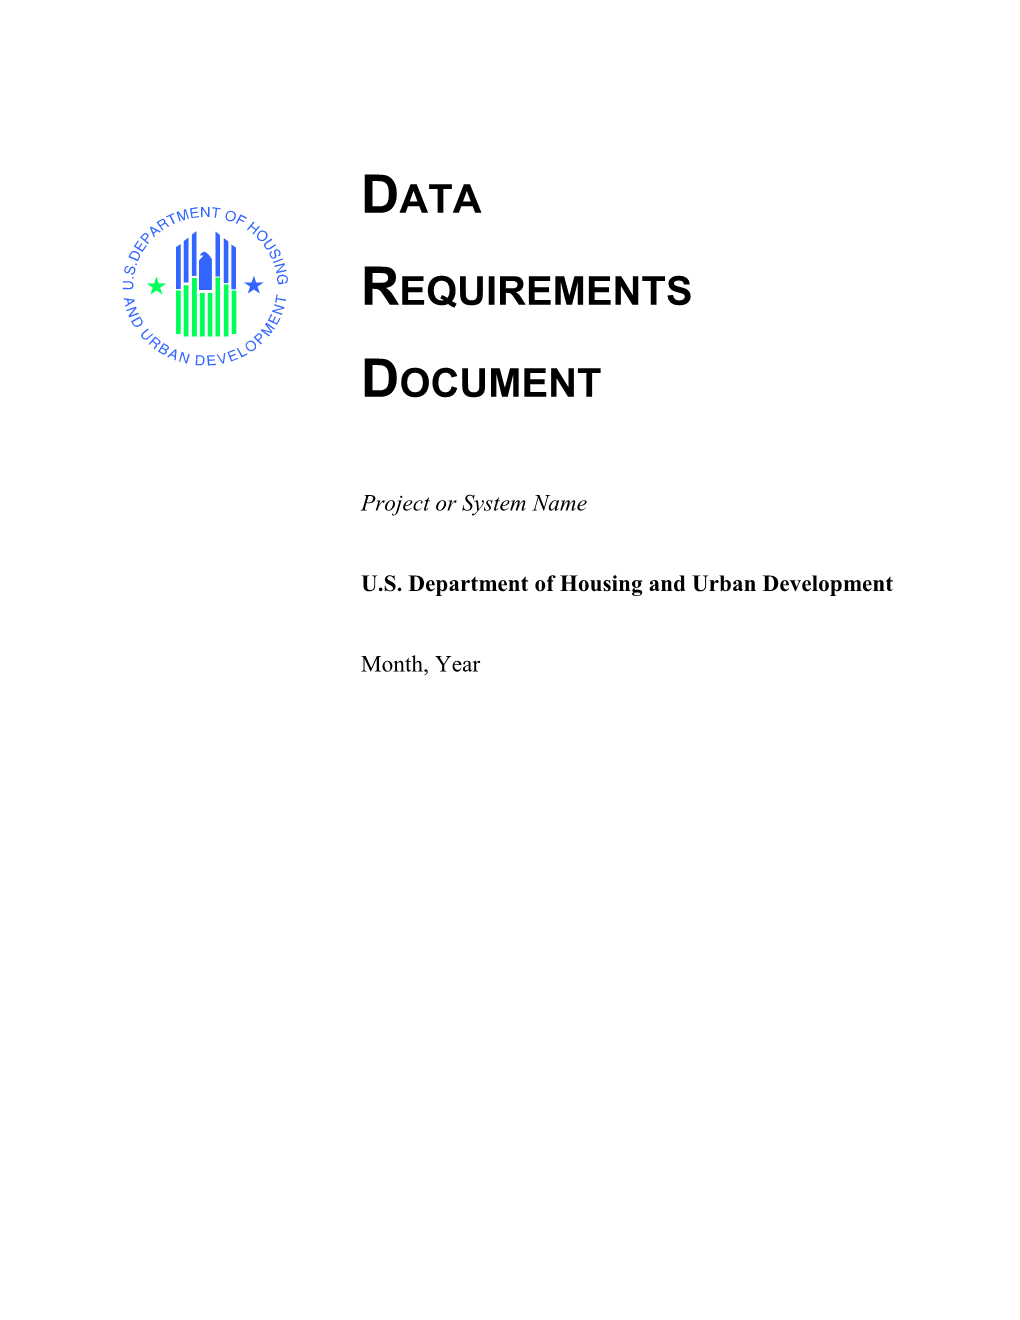 Data Requirements Document